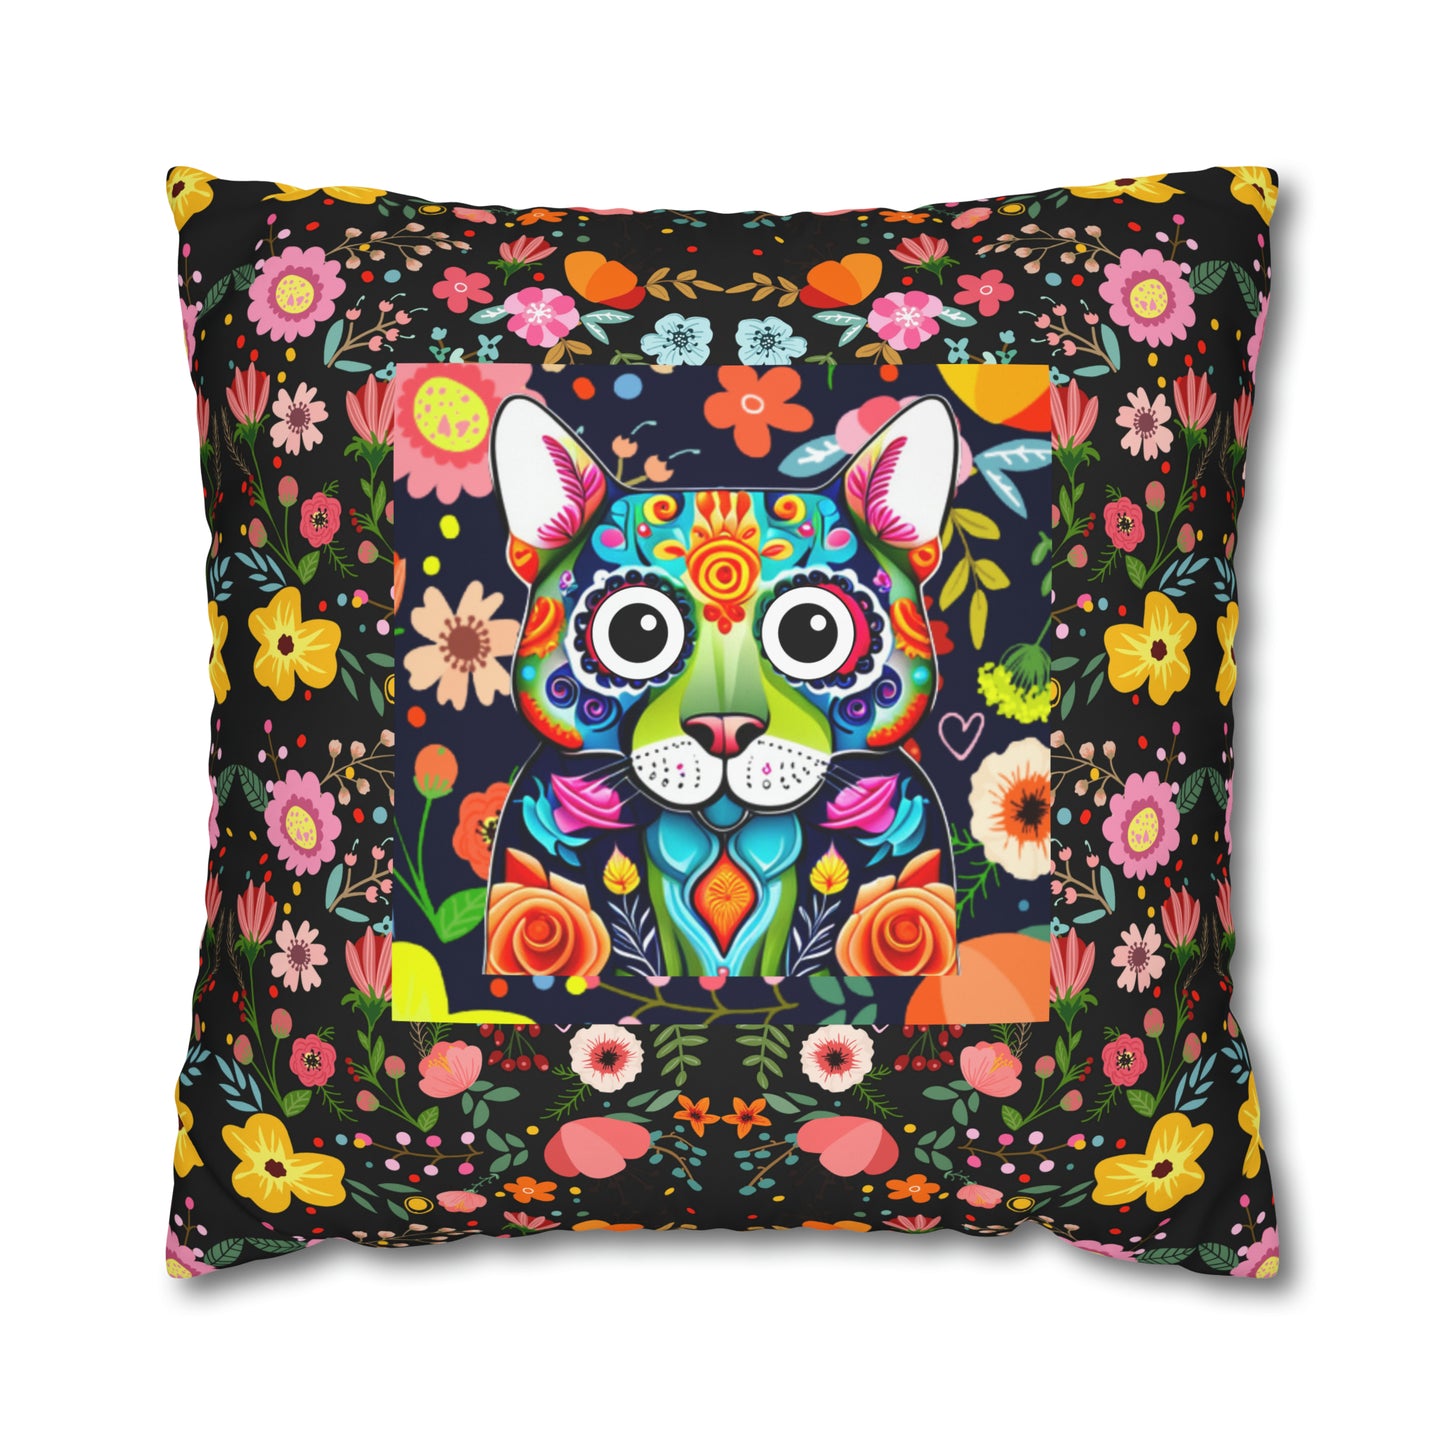 Flower Power Kitty Cat Floral Art Children's Playroom Nursery Art Square Poly Canvas Pillow Cover